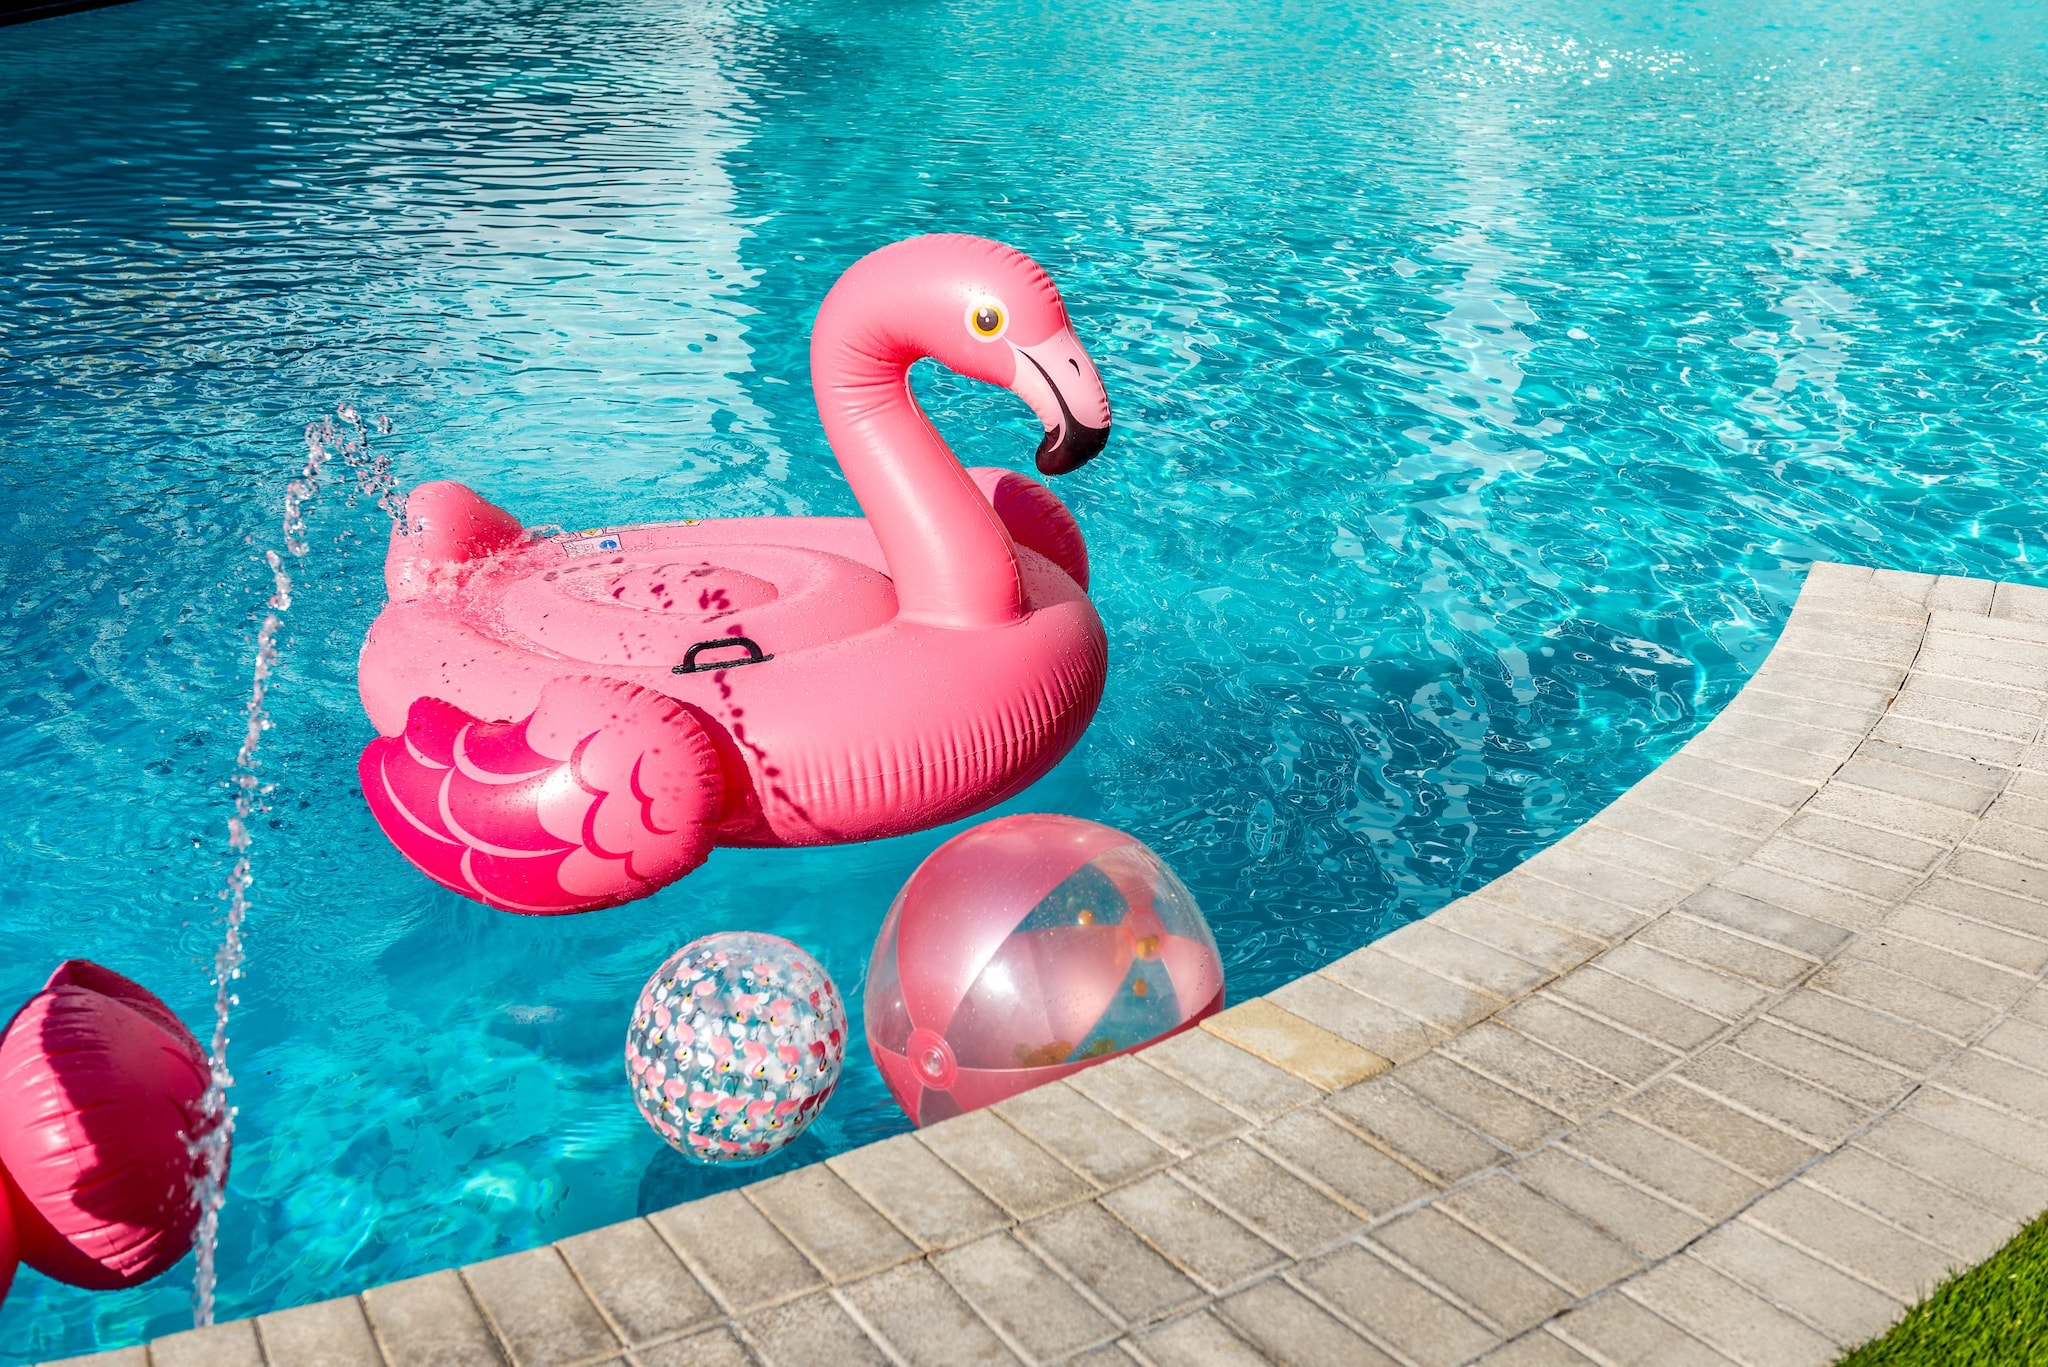 A flamingo pool float in a pool with other pool toys.